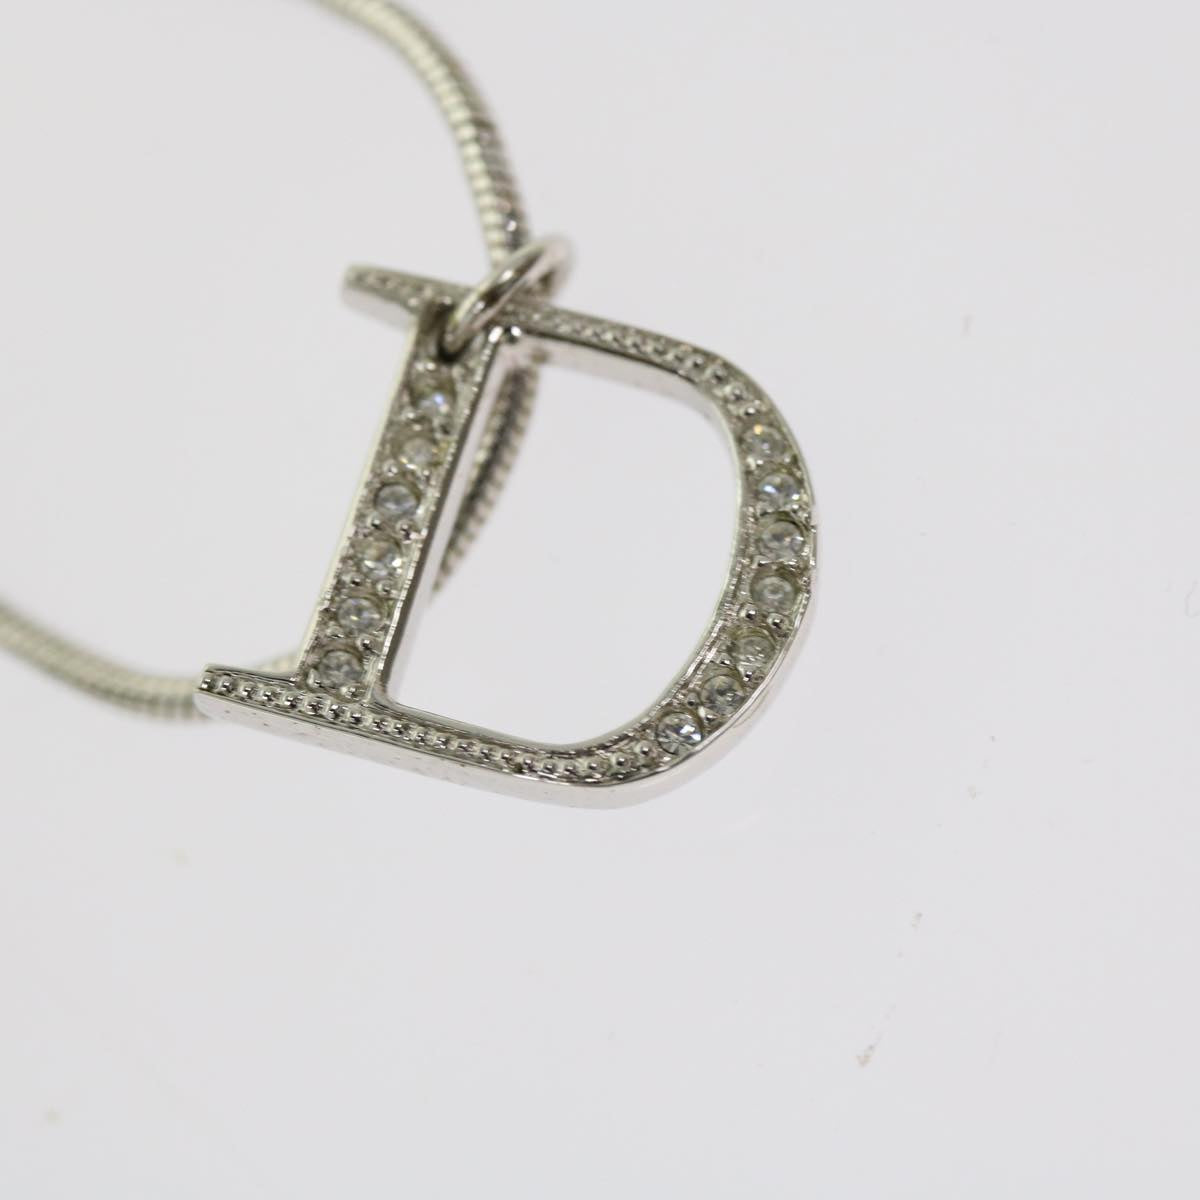 Christian Dior Necklace metal Silver Auth am5461